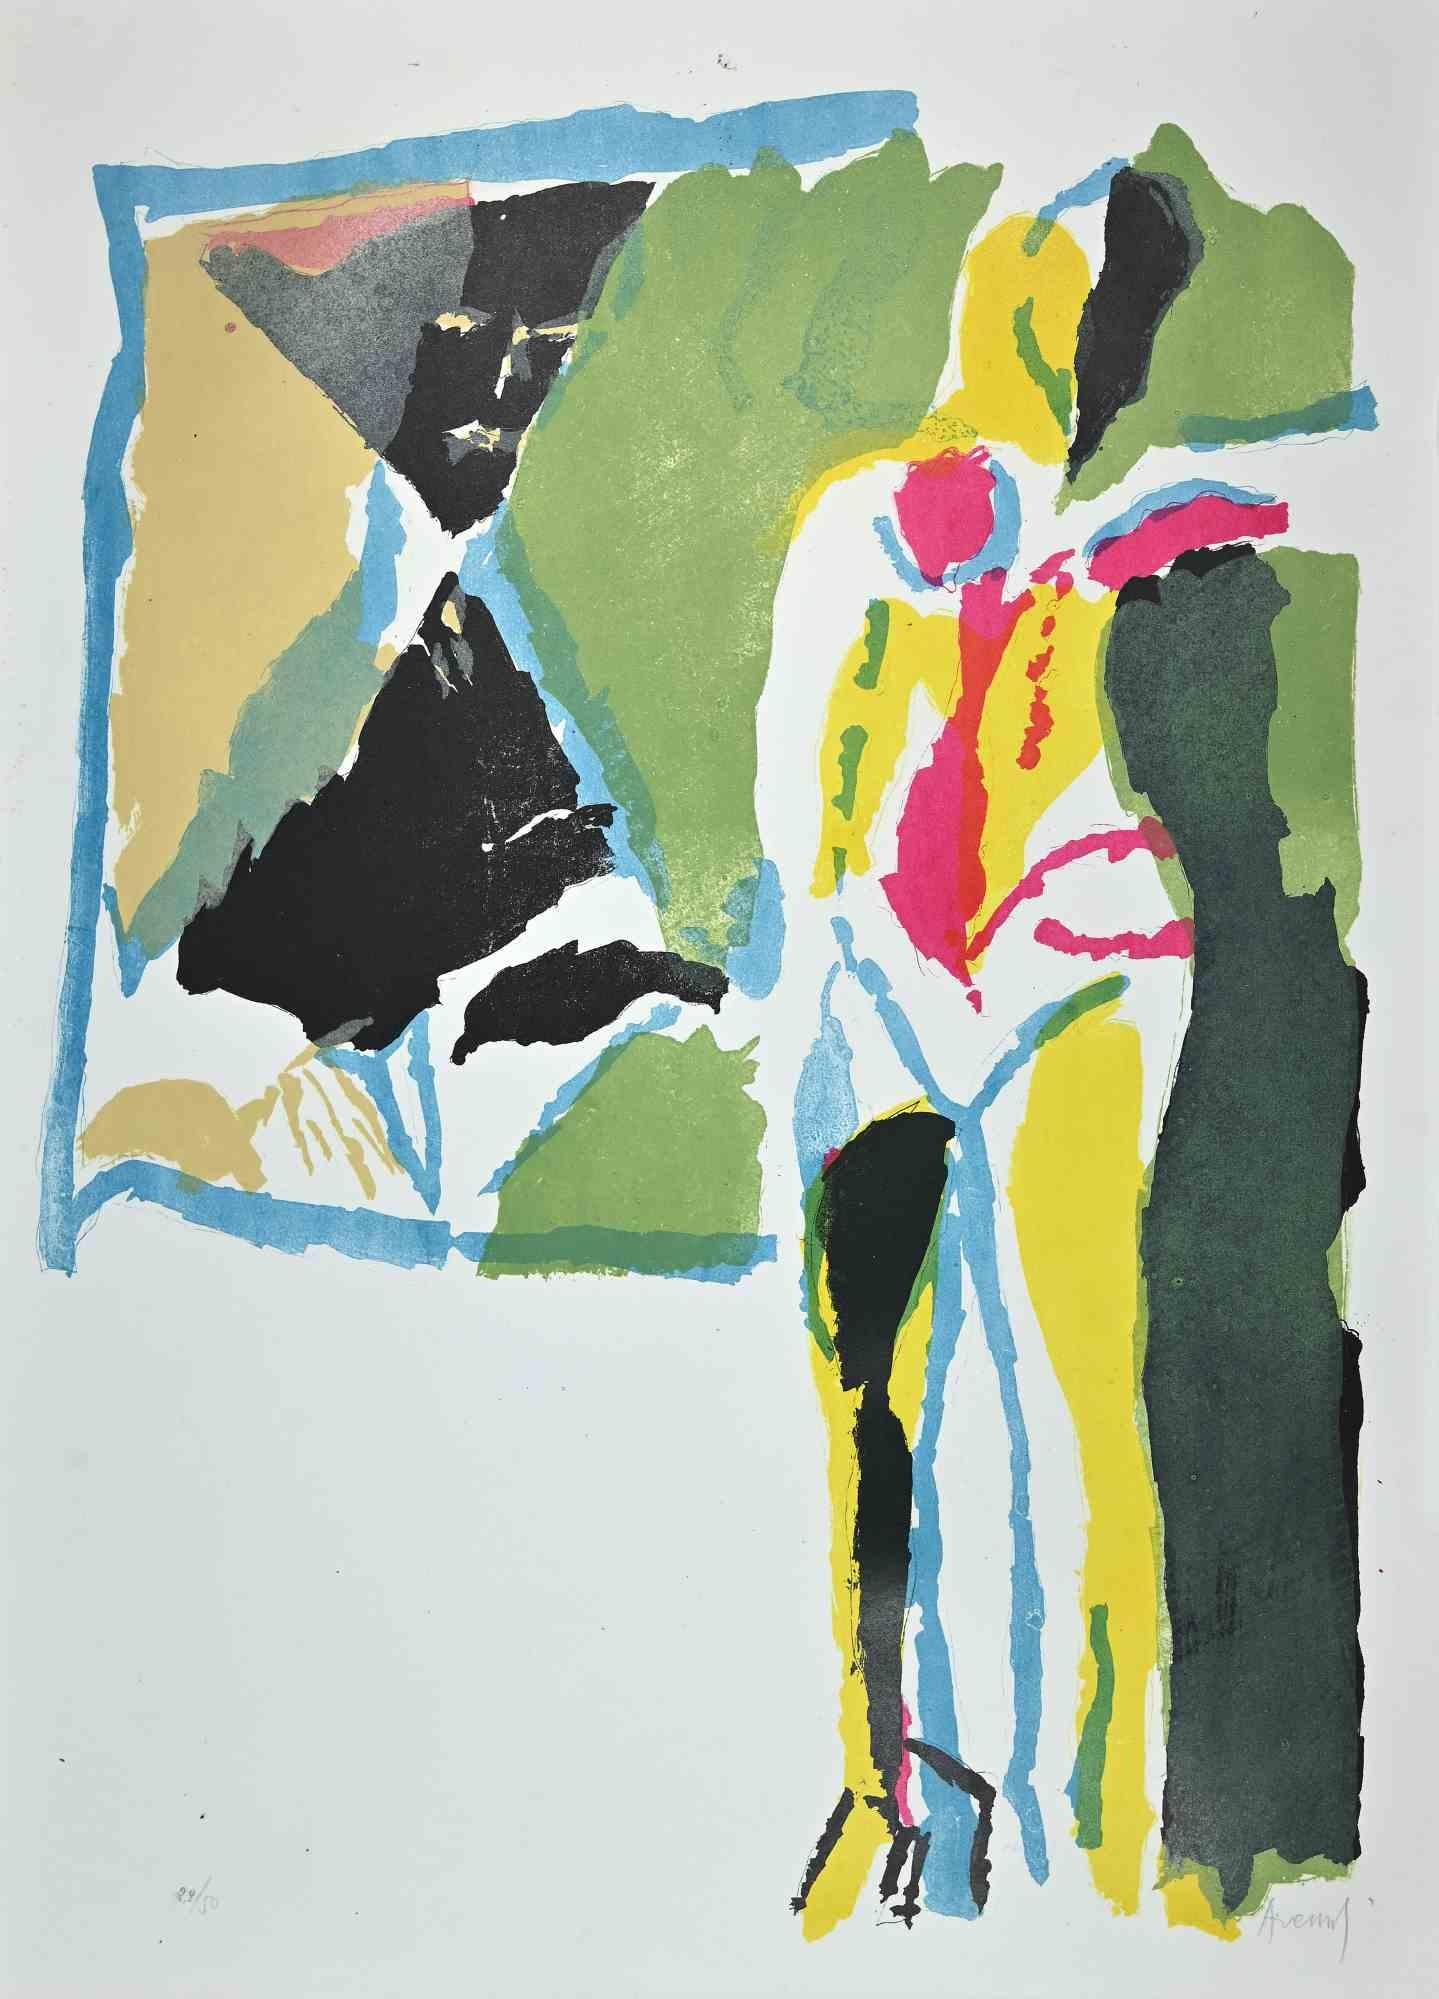 Marcello Avenali Abstract Print - Asymmetric Abstract Composition - Lithograph by M. Avenali - 1960